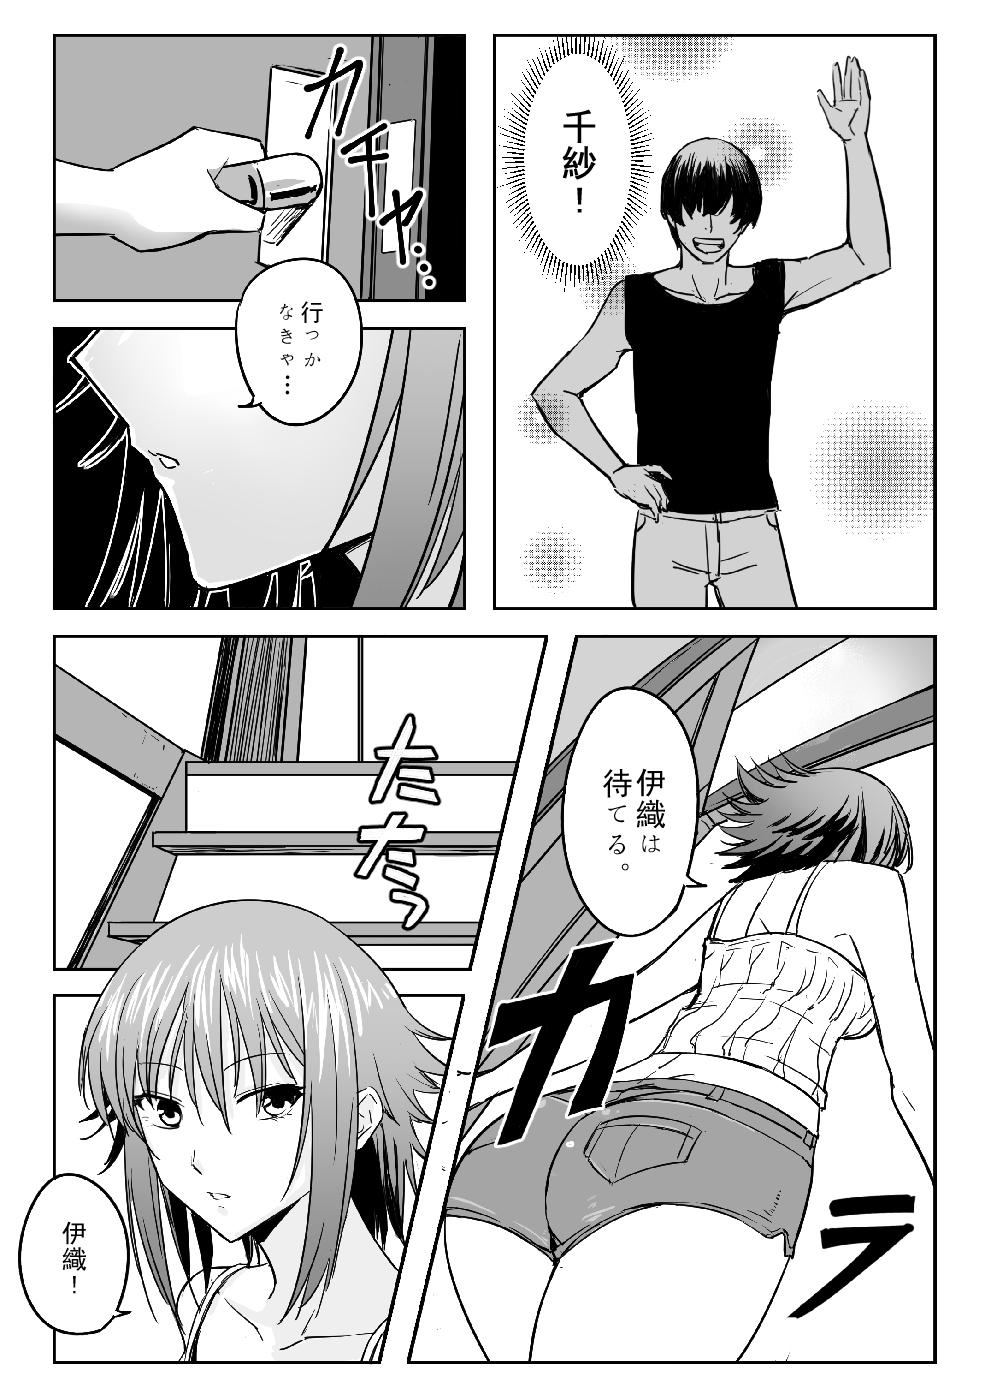 Affair Chika-chan is a goodbye! - Grand blue Cameltoe - Page 5